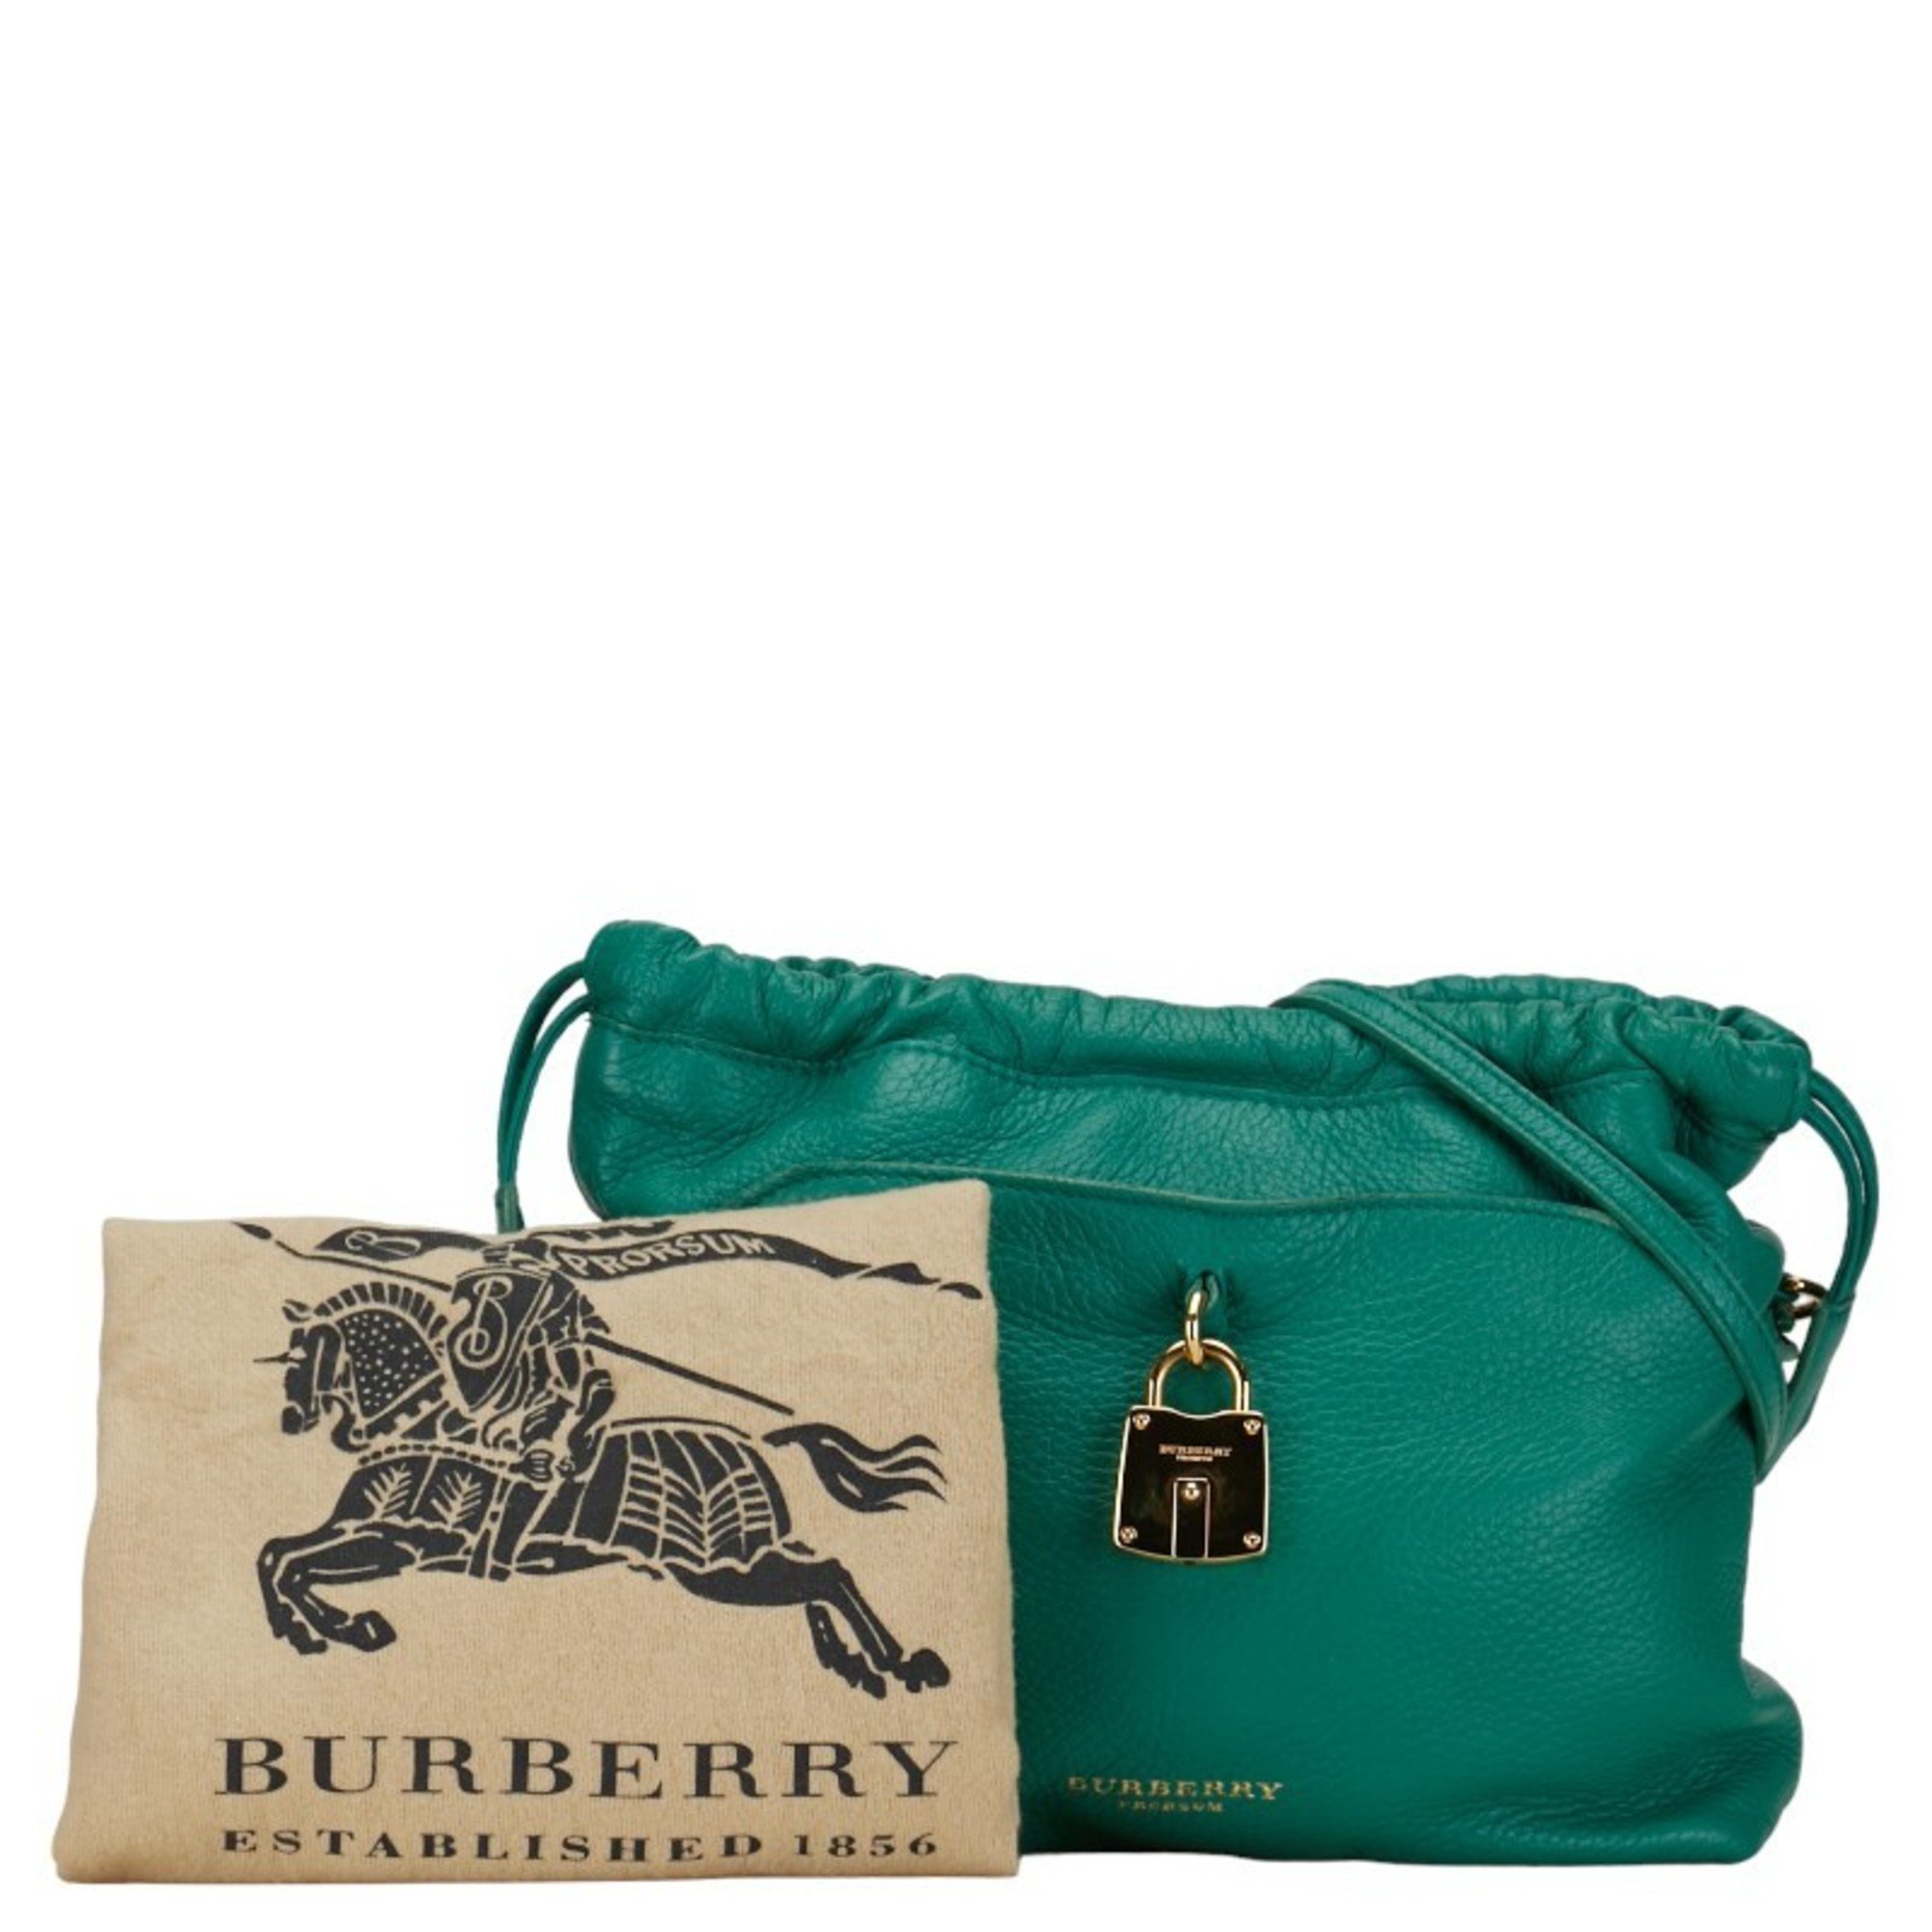 Burberry Shoulder Bag Green Leather Women's BURBERRY